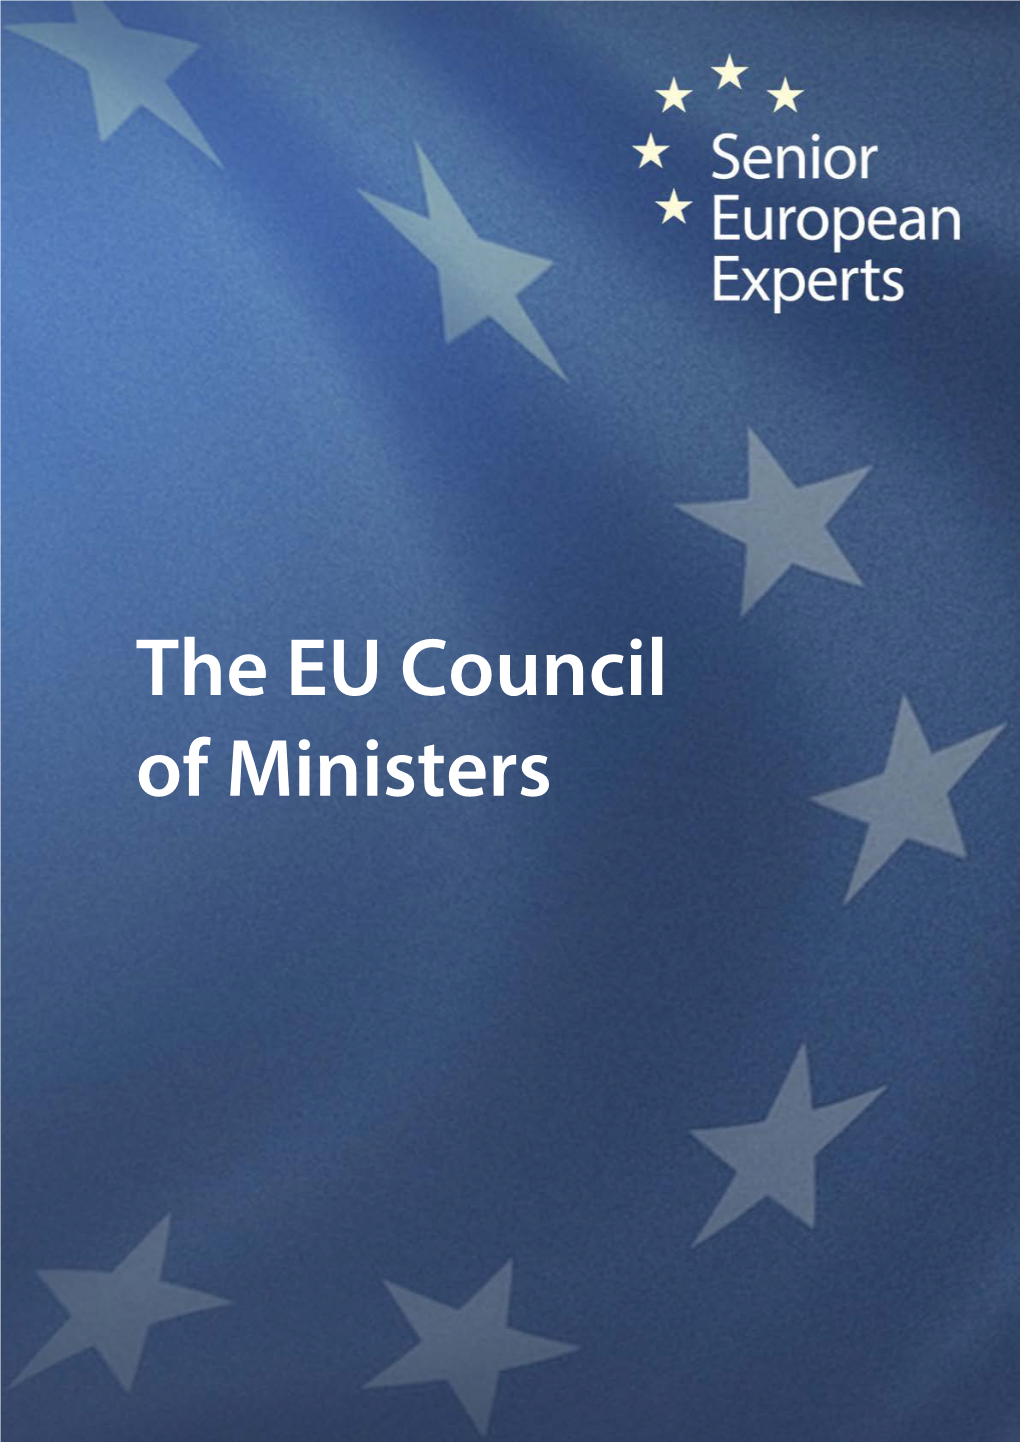 The EU Council of Ministers